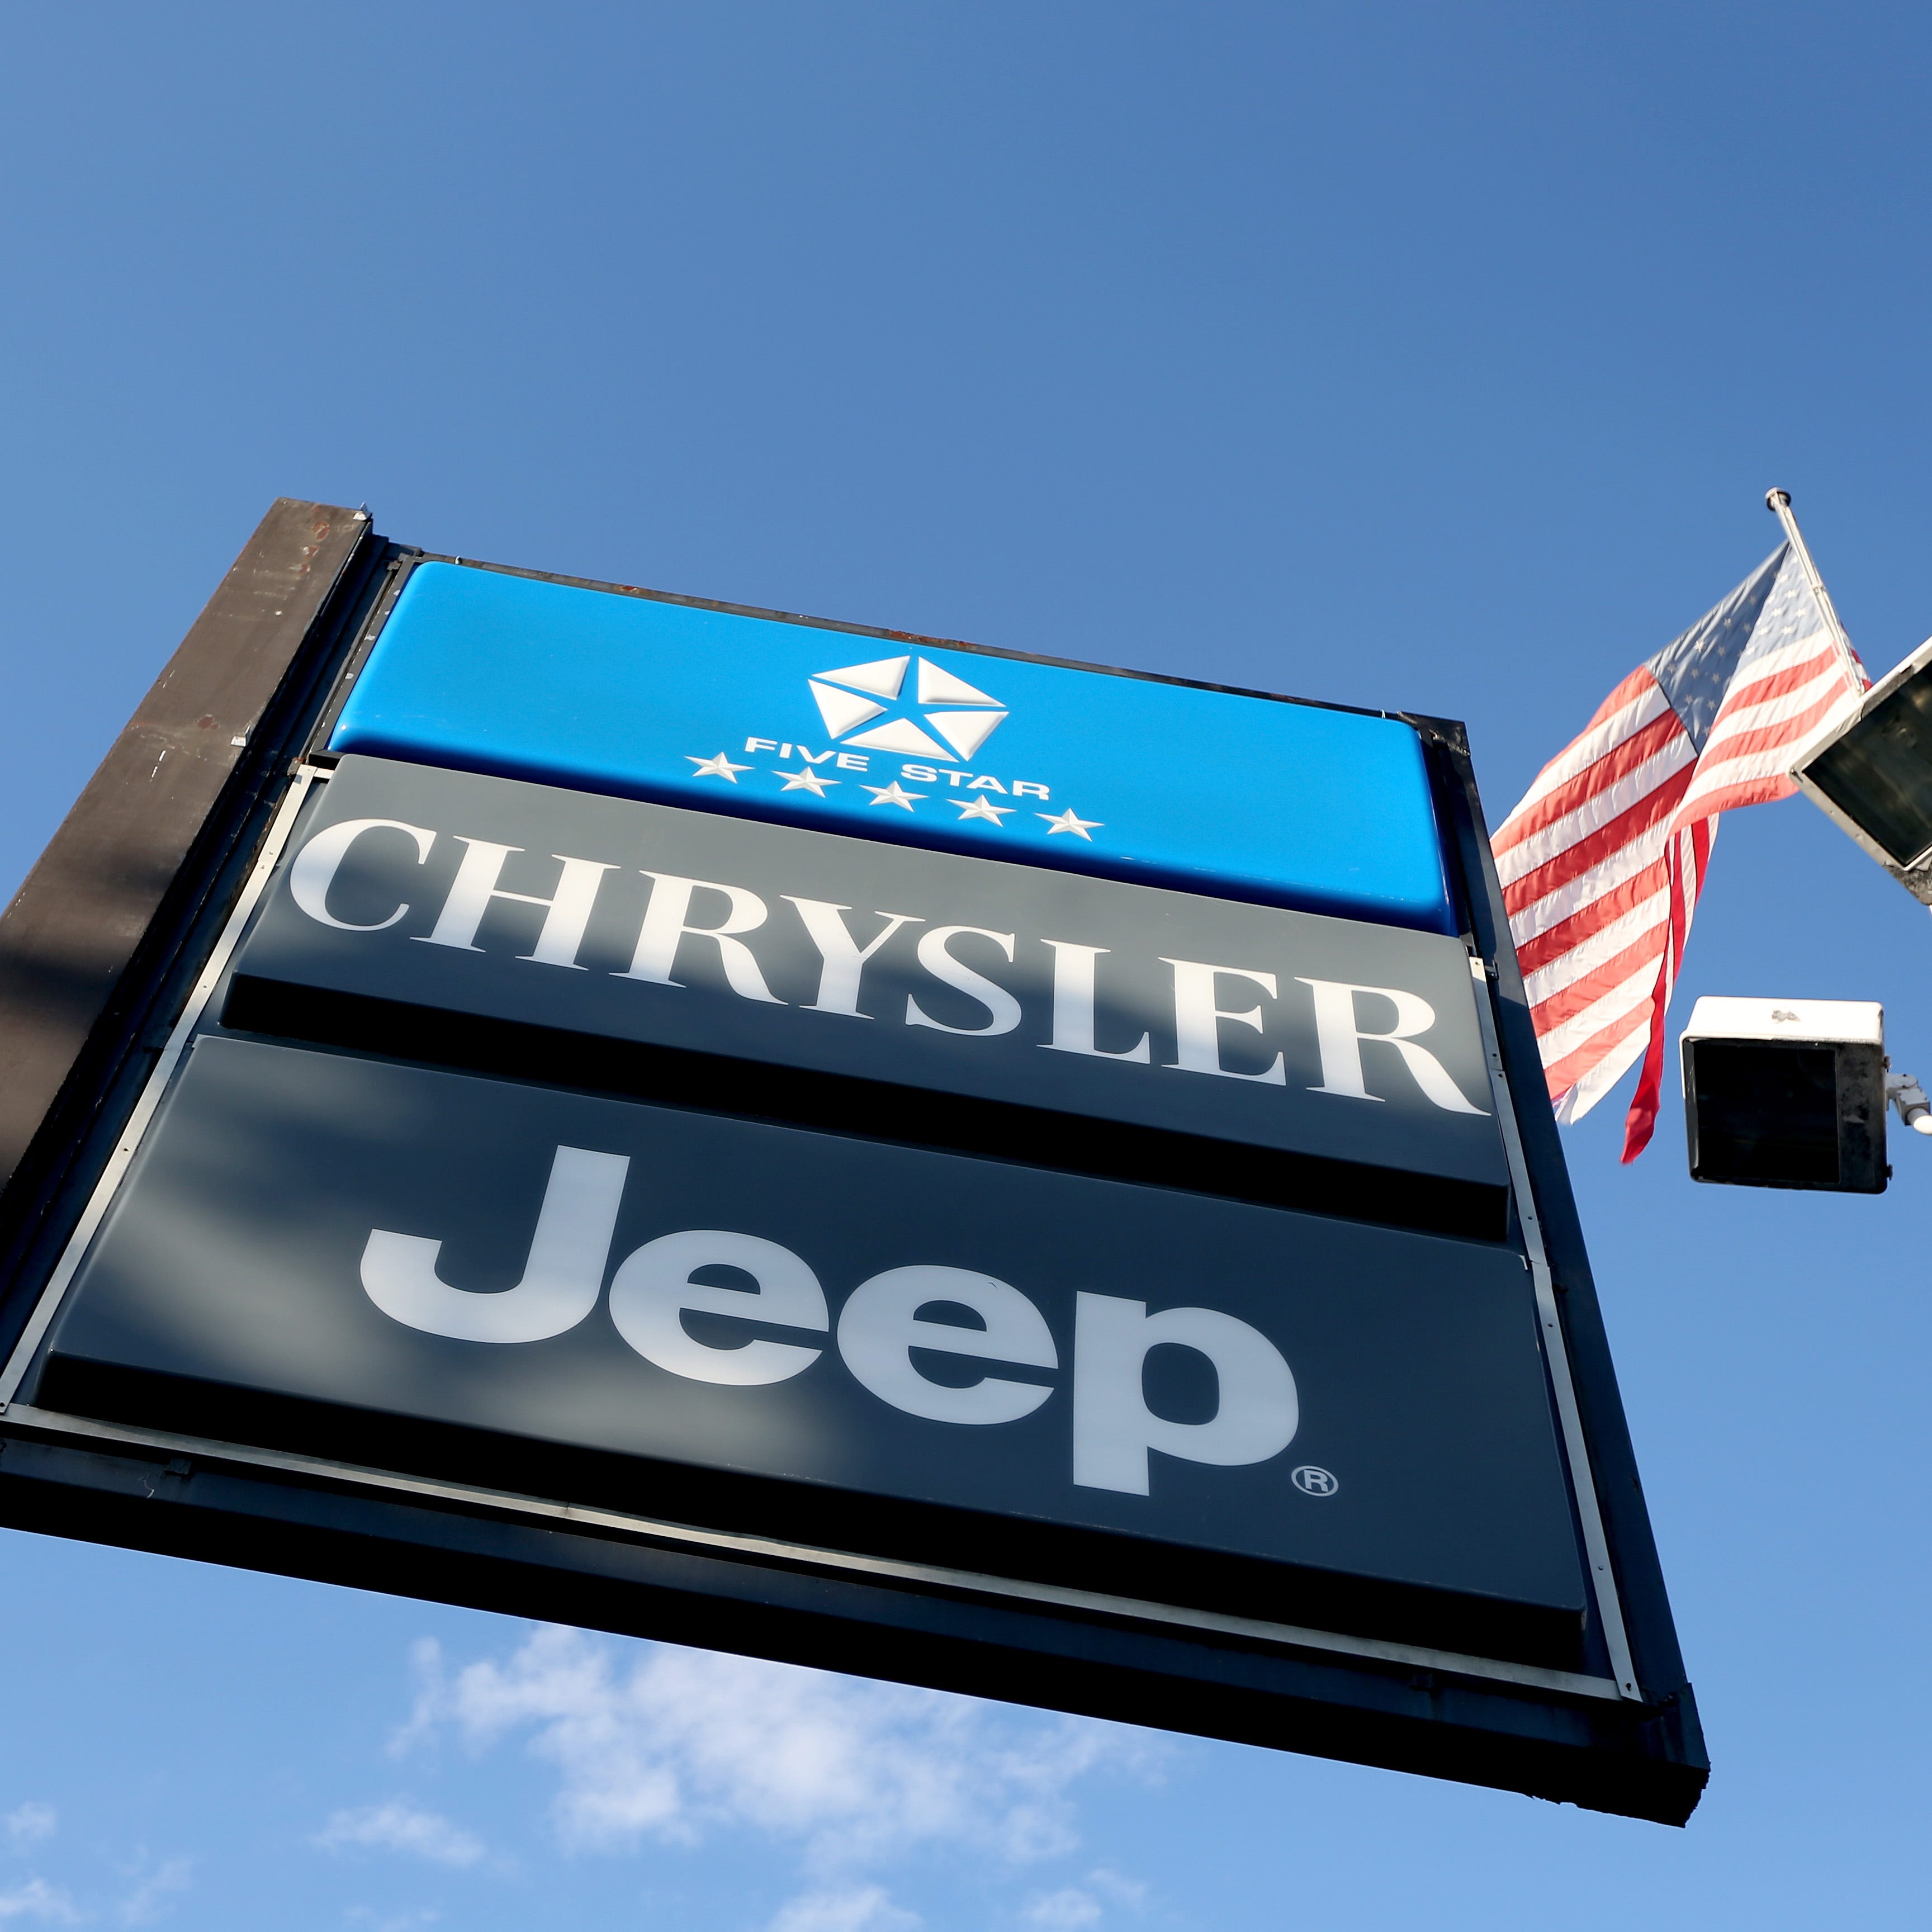 FILE - JUNE 3:  According to reports June 3, 2014, Chrysler announced May sales rose 17 percent, beating expectations of a 14 percent increase. HOLLYWOOD, FL - DECEMBER 03:  A sign stands at the Hollywood Chrysler Jeep dealership on December 3, 2013 in Hollywood, Florida. Chrysler's U.S. sales rose 16% in November with just over 142,000 vehicles sold last month for its best November in six years.  (Photo by Joe Raedle/Getty Images) ORG XMIT: 453802985 ORIG FILE ID: 453346999